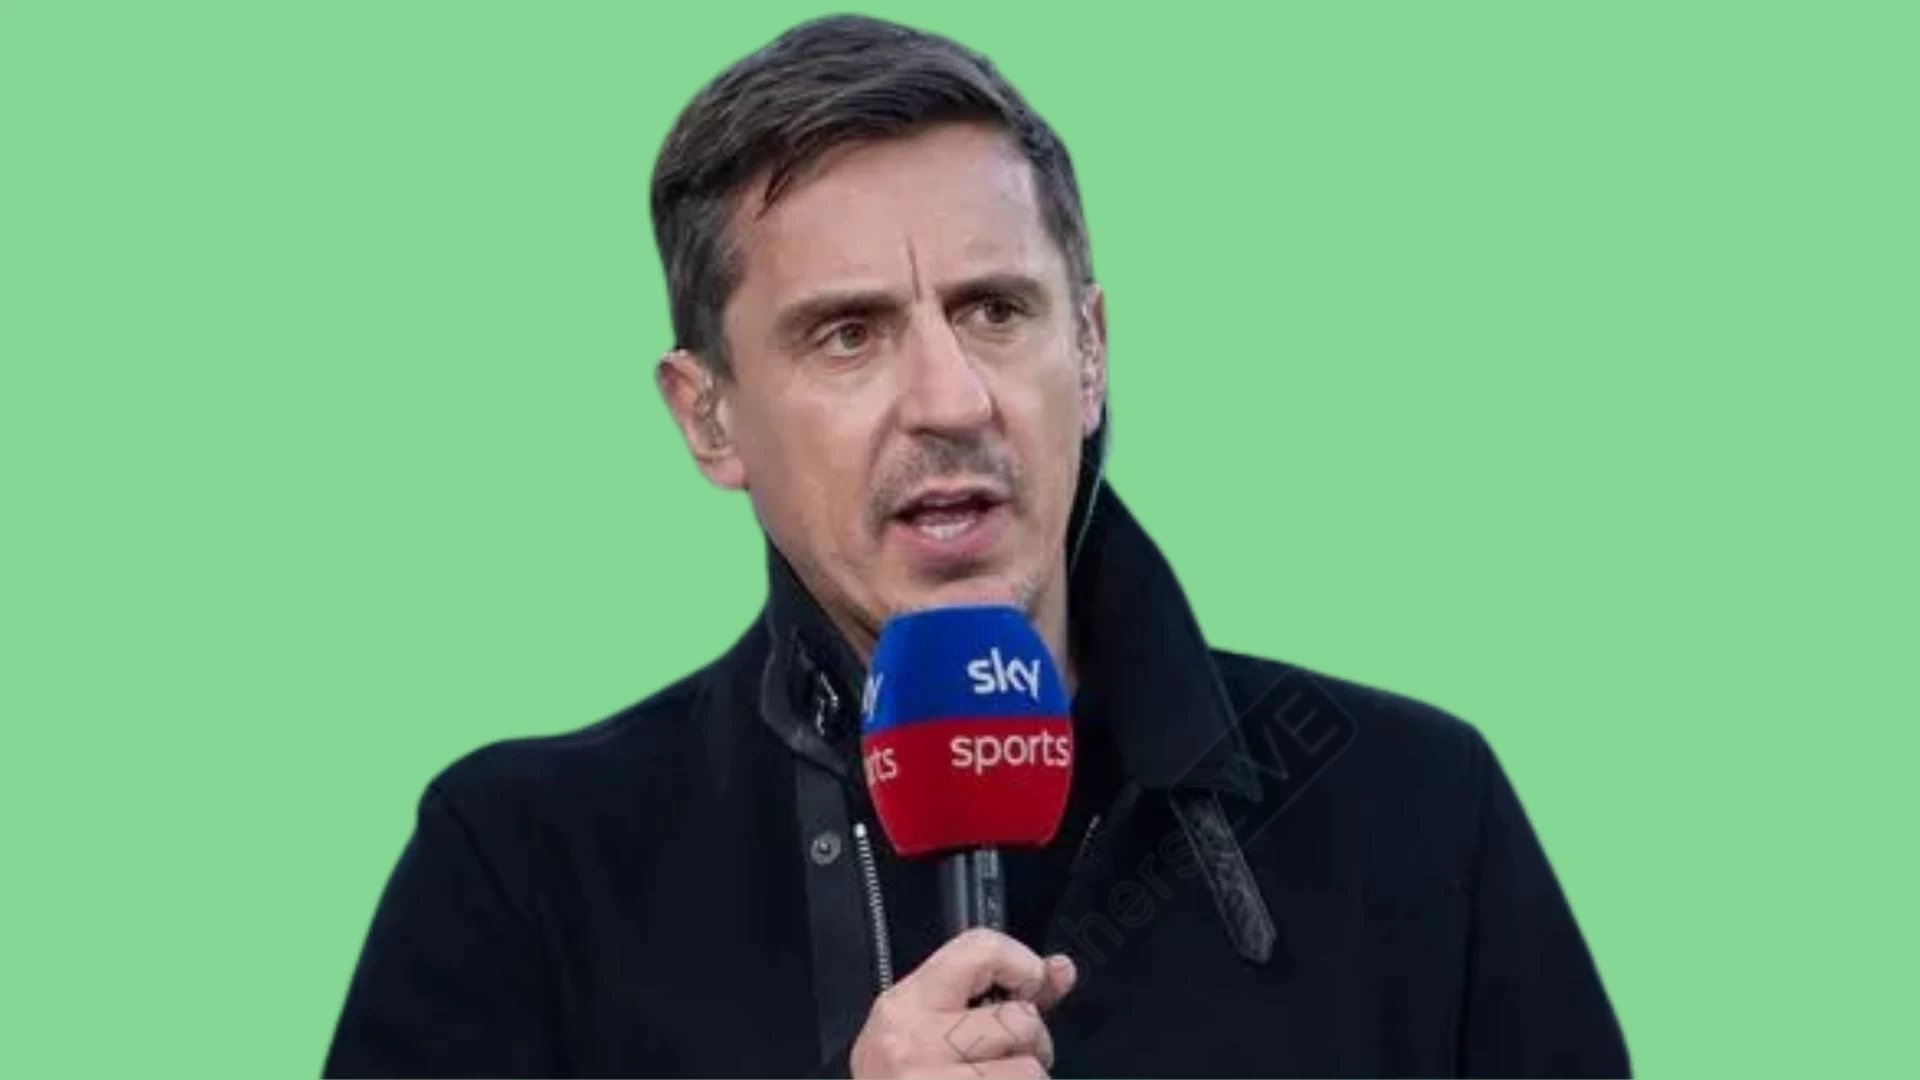 Gary Neville Ethnicity, What is Gary Neville's Ethnicity?